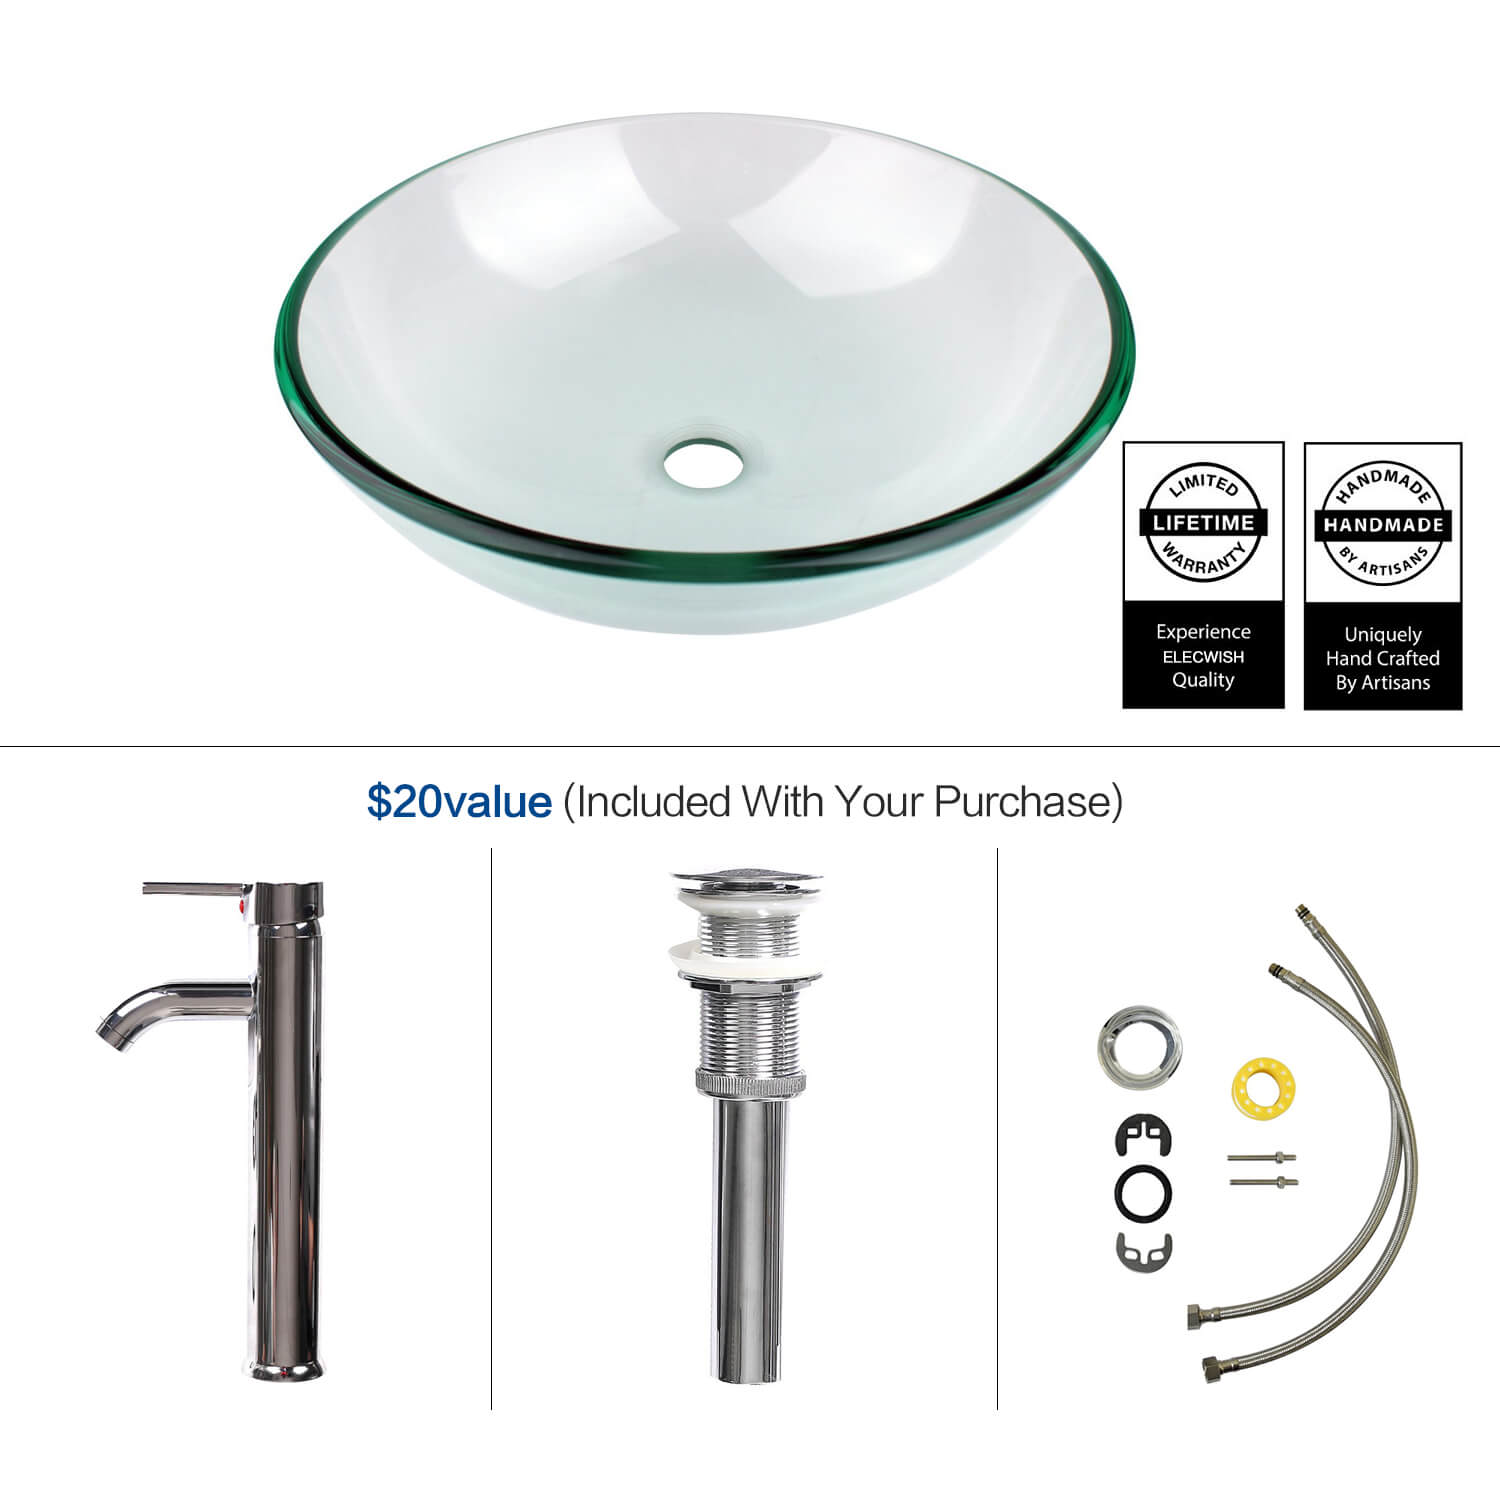 Elecwish clear glass sink included parts